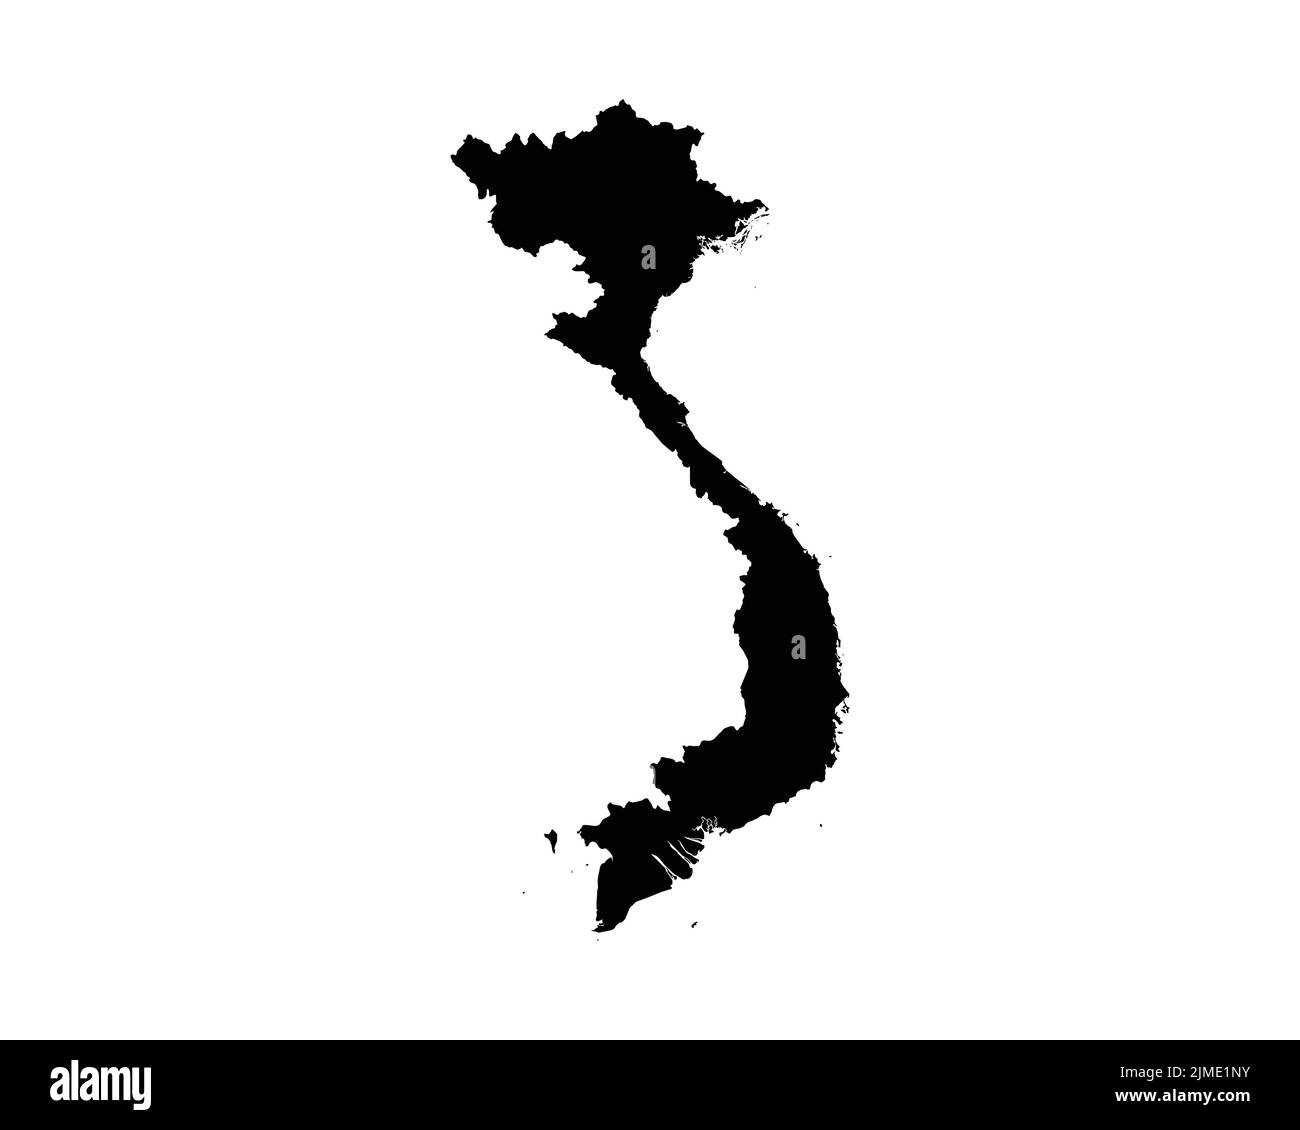 Vietnam Map. Vietnamese Country Map. Black and White National Nation Geography Outline Border Boundary Territory Shape Vector Illustration EPS Clipart Stock Vector